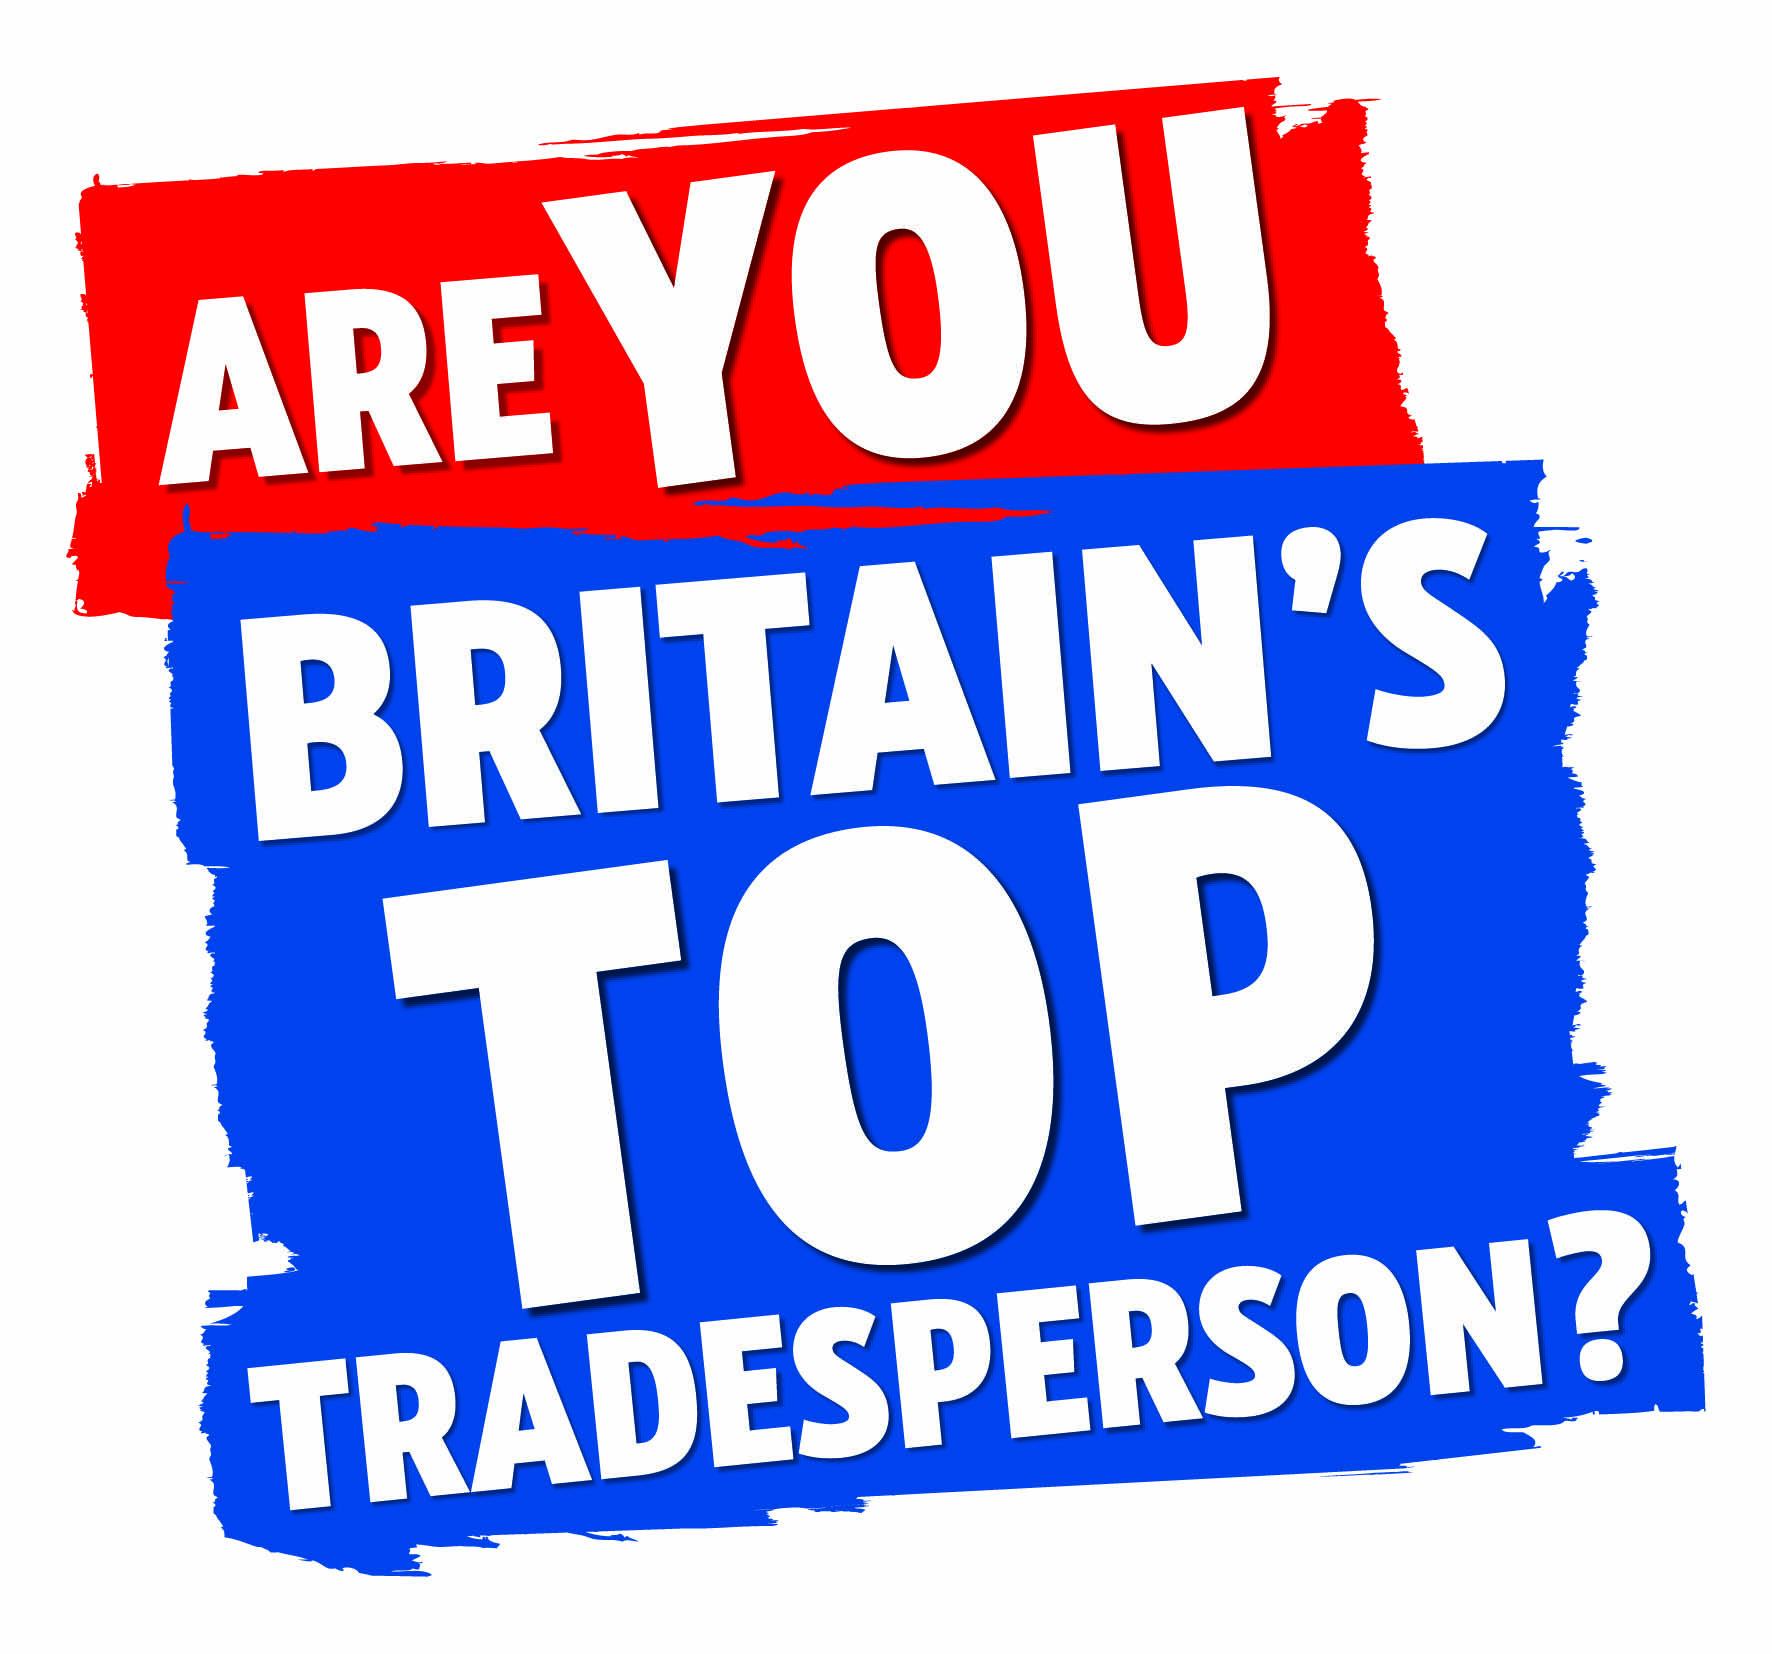 Today we launch the hunt for Screwfix’s Britain’s Top Tradesperson